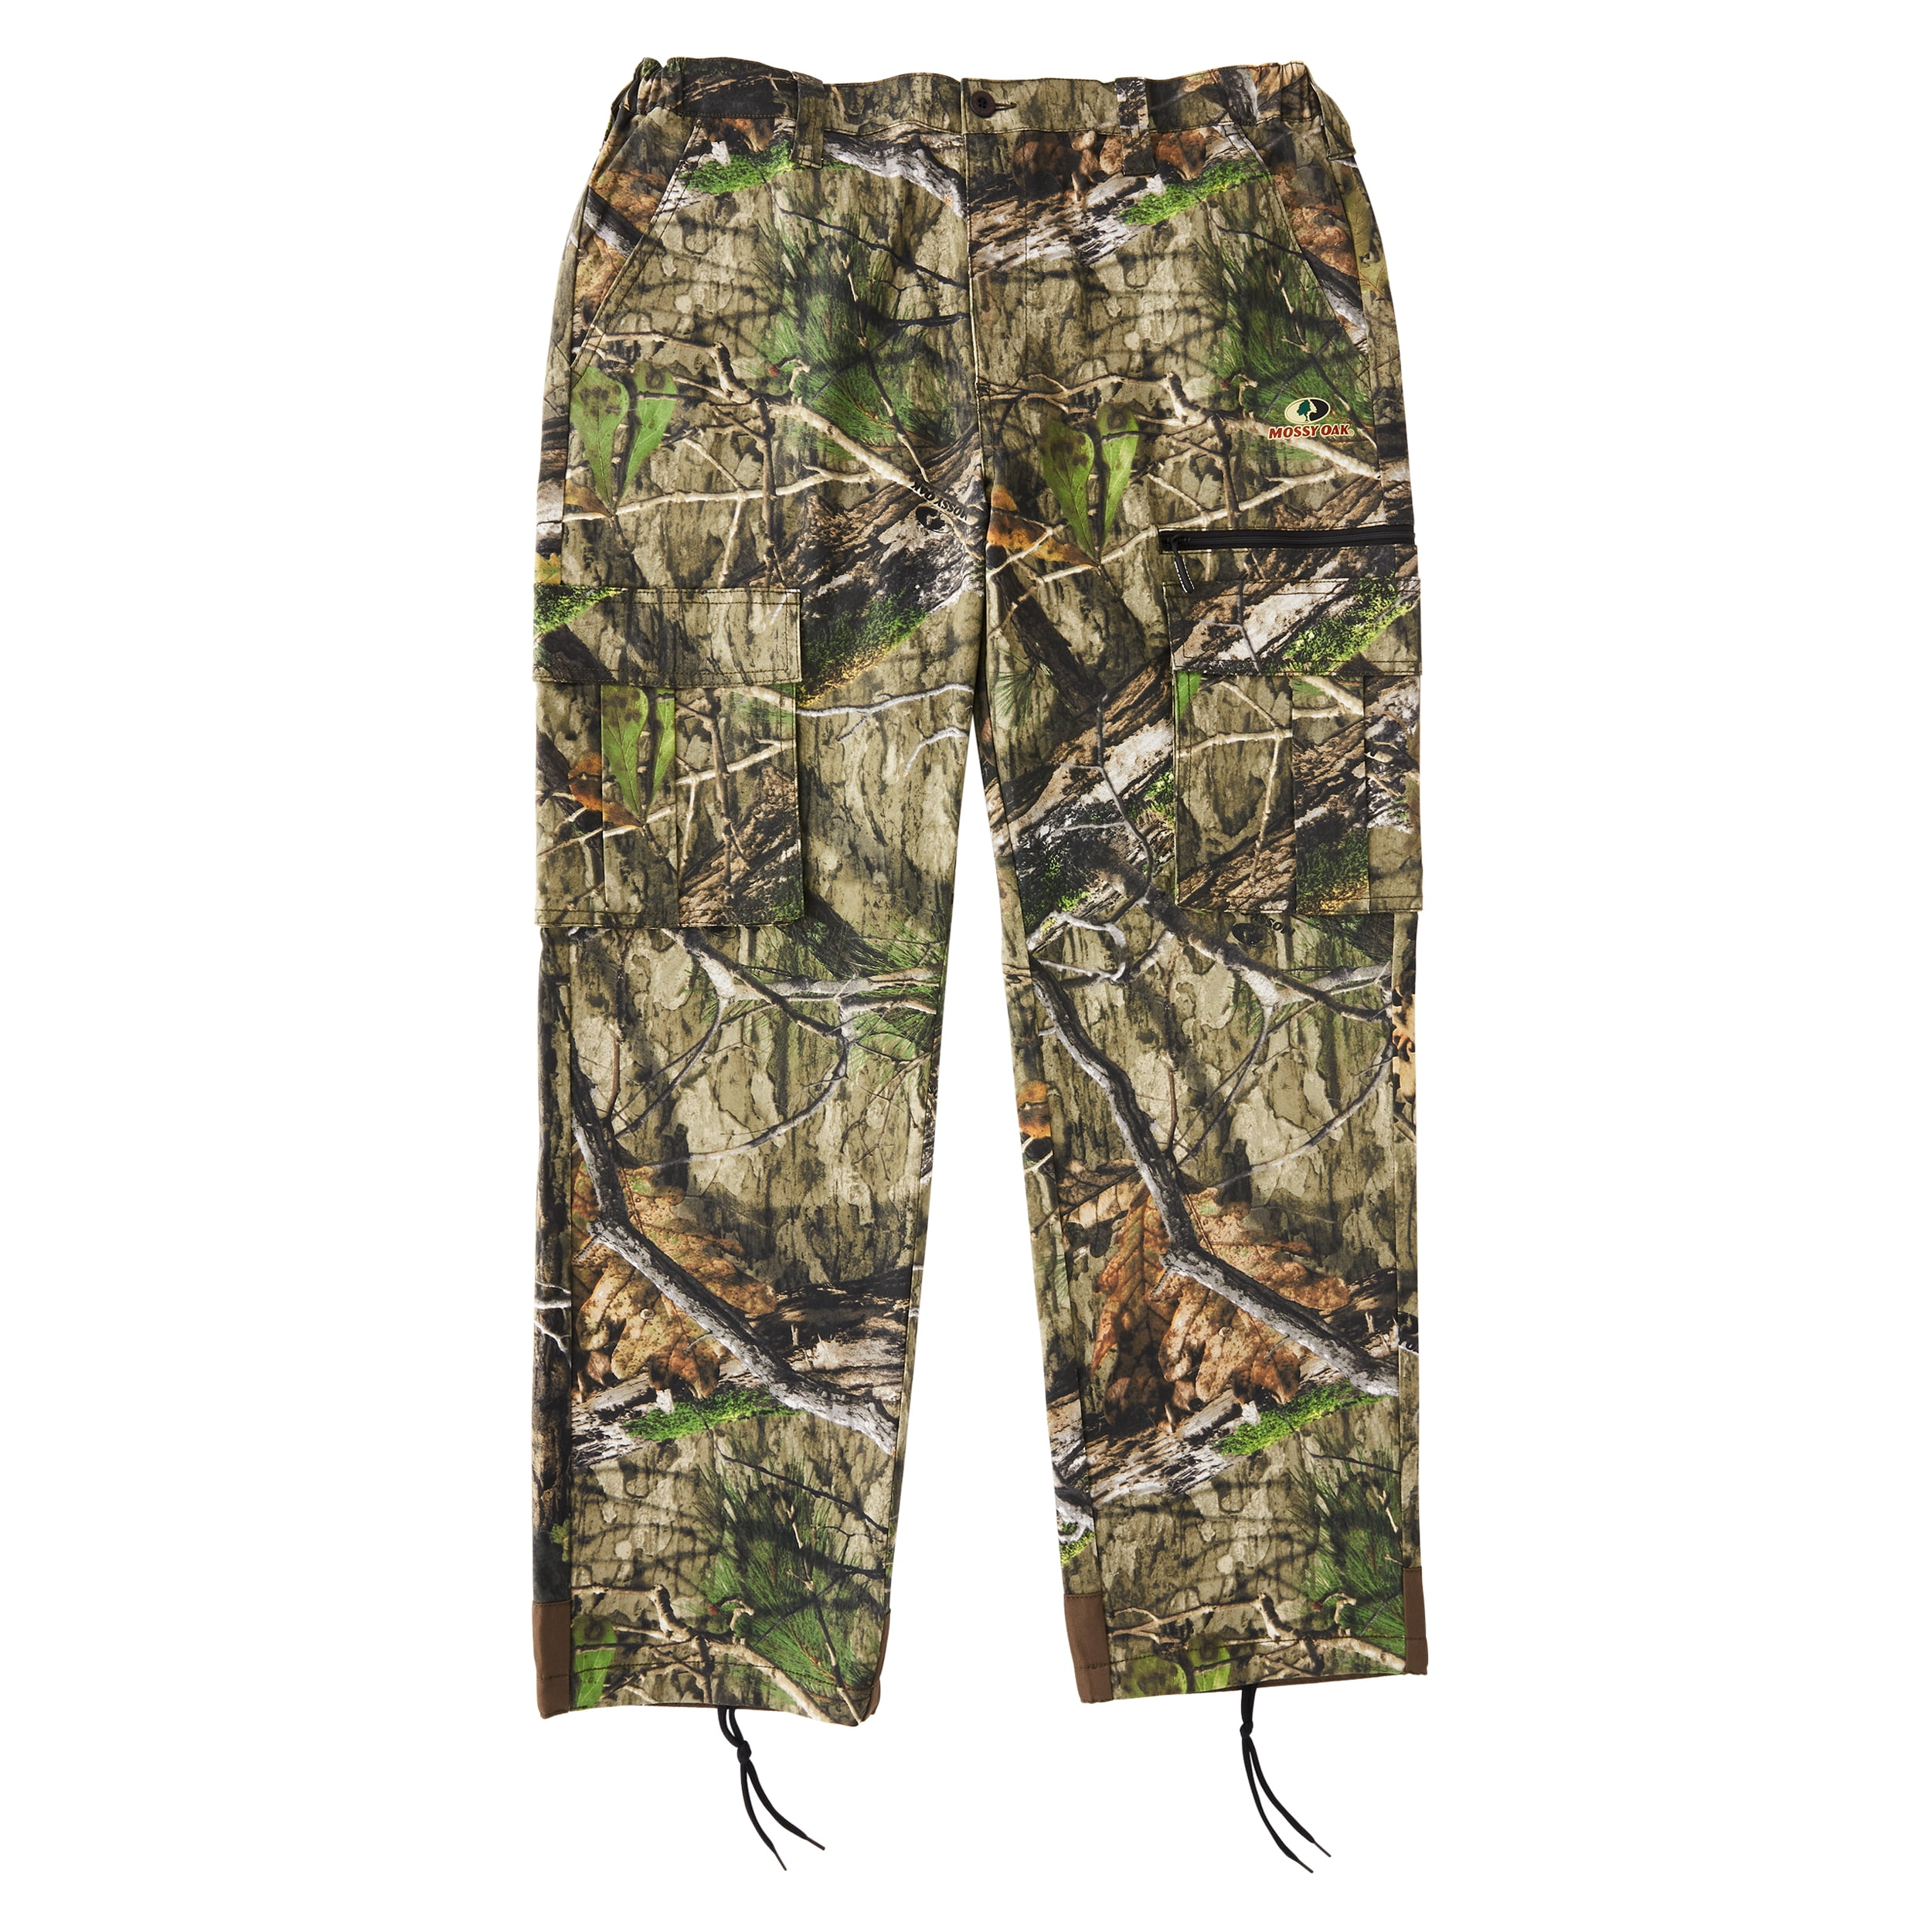 NEW Mossy Oak Camo Breakup Country Hunting NEW Cargo Camouflage Pants Jeans Mens